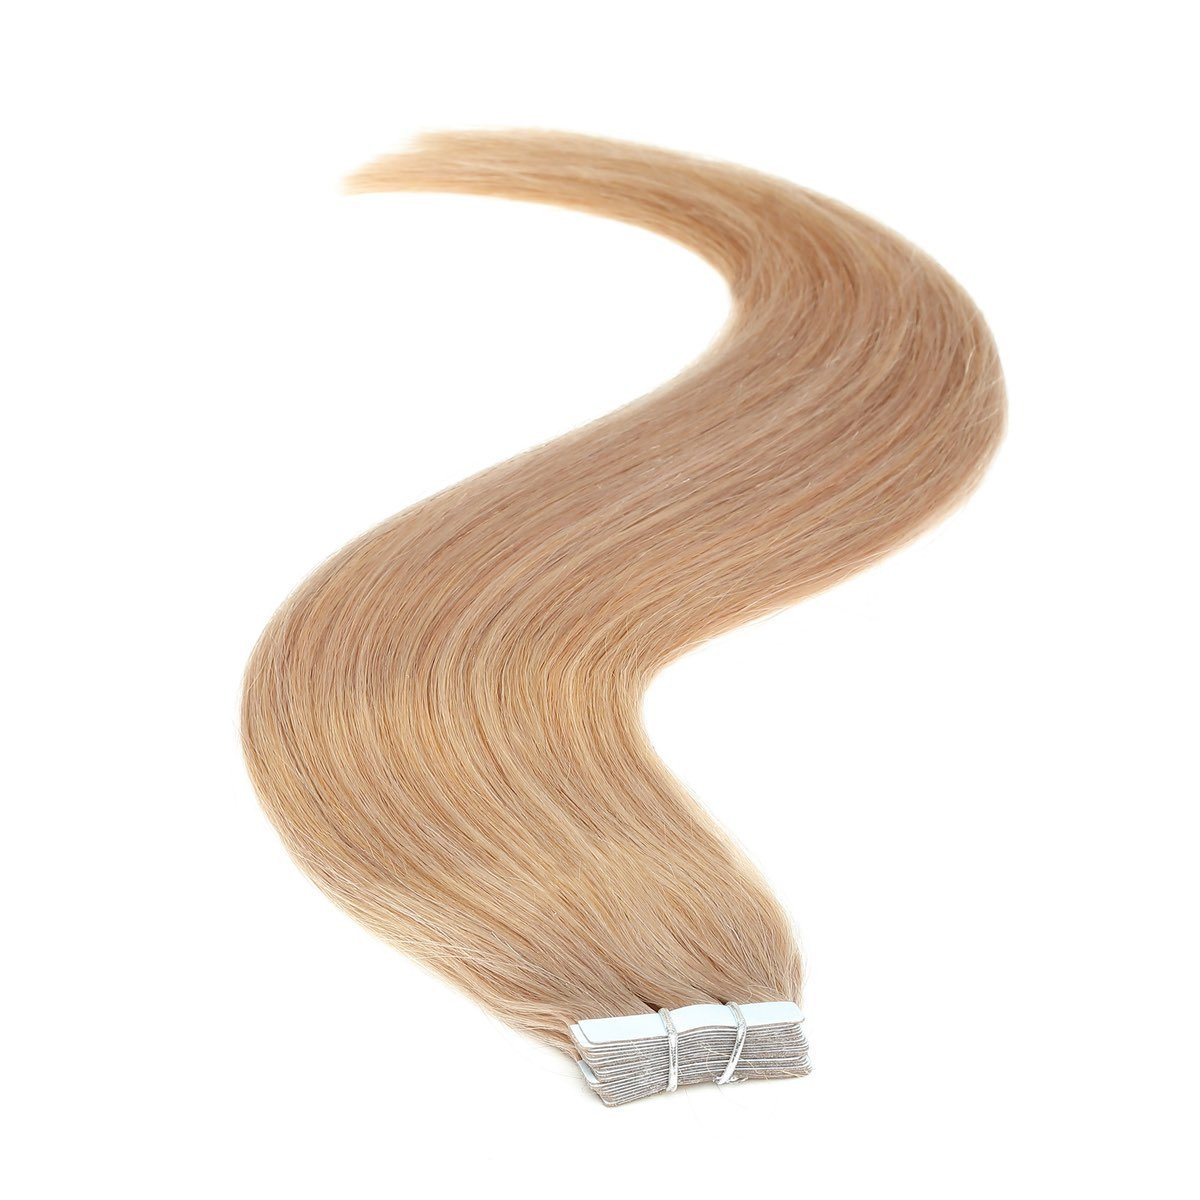 Tape in Hair Extensions | 18 inch | 20ps | 50g | Mousey Brown (8) - Beauty Hair Products LtdHair Extensions